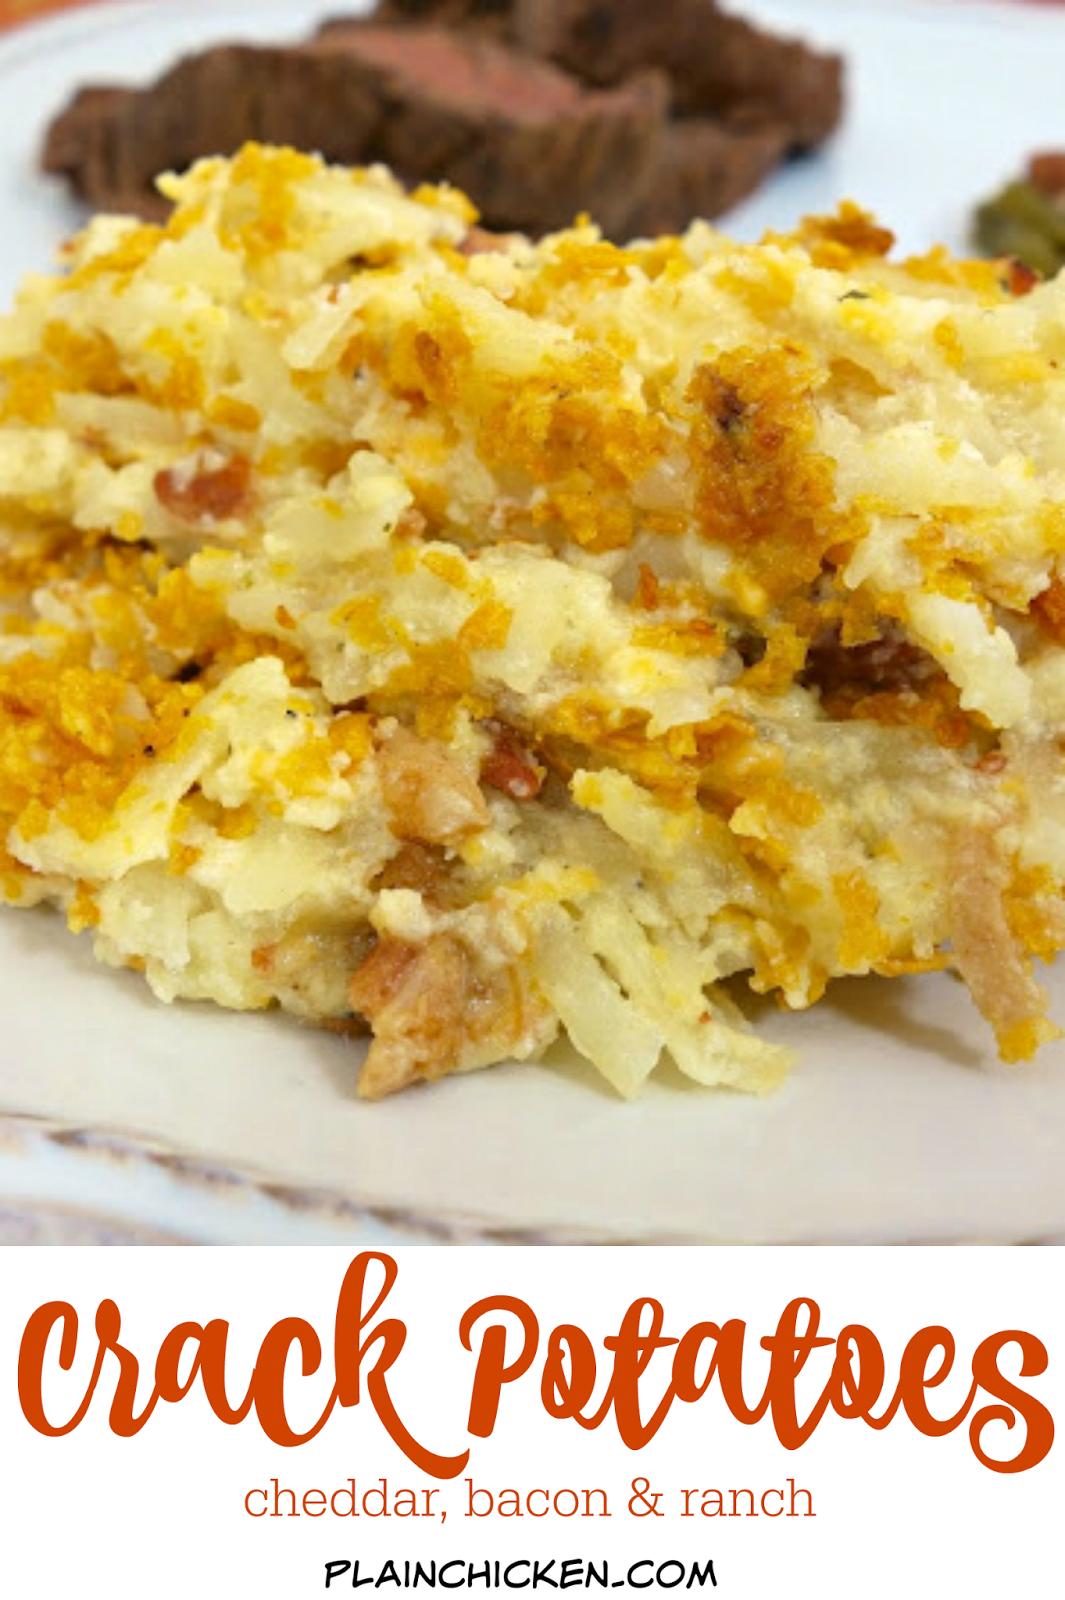 "Crack Potatoes" - potato casserole made with Greek yogurt, cheddar, bacon & ranch! SO good. People go crazy over these! I take these to potlucks and there are never any left!! Can make ahead and freeze.